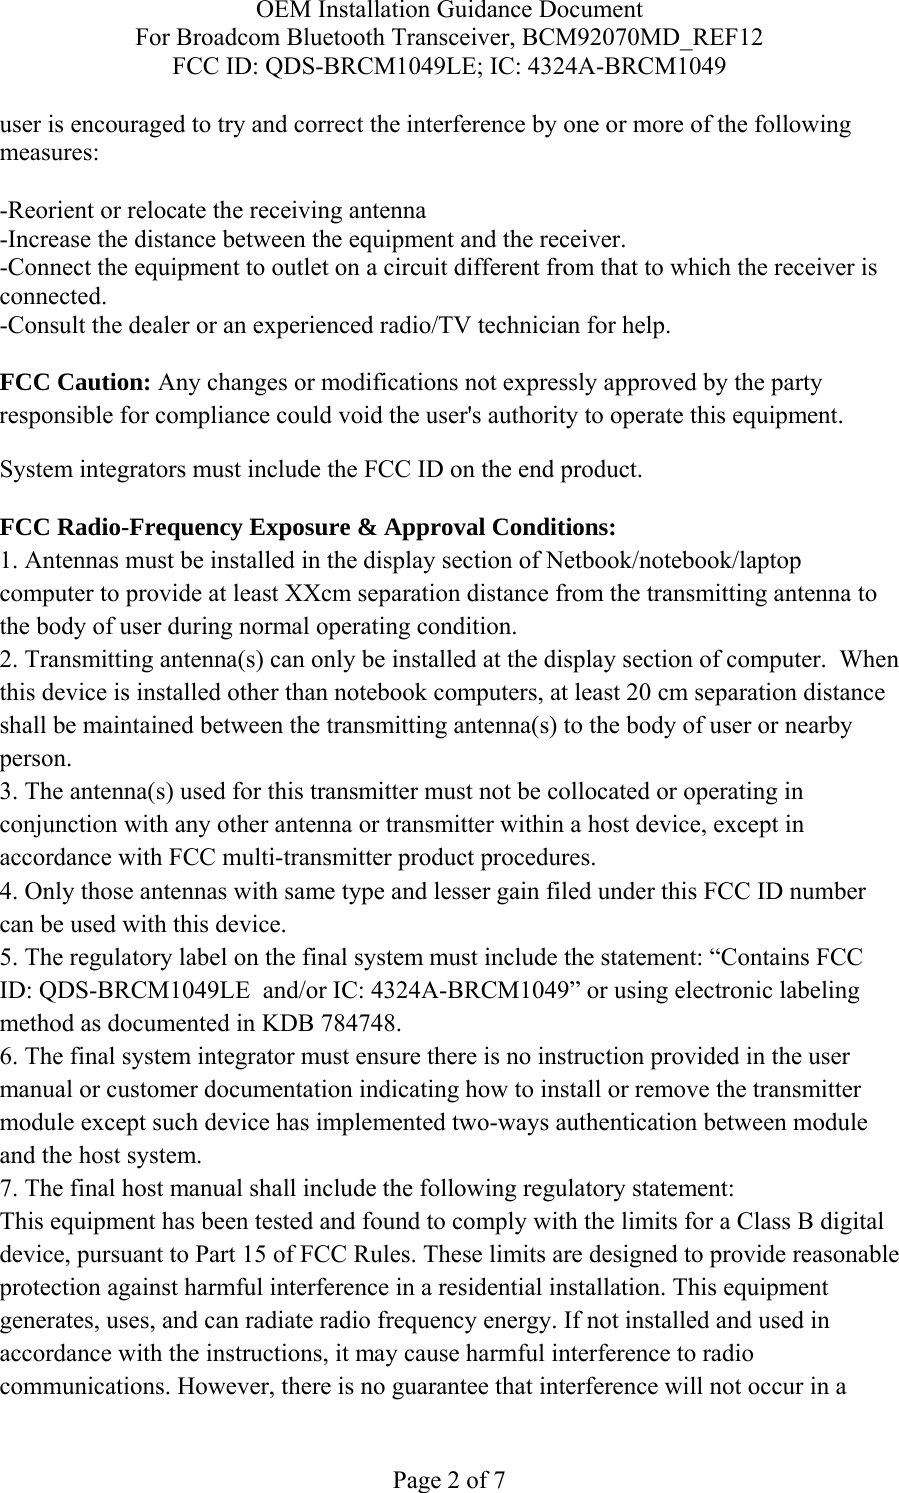 OEM Installation Guidance Document For Broadcom Bluetooth Transceiver, BCM92070MD_REF12 FCC ID: QDS-BRCM1049LE; IC: 4324A-BRCM1049  Page 2 of 7 user is encouraged to try and correct the interference by one or more of the following measures:   -Reorient or relocate the receiving antenna -Increase the distance between the equipment and the receiver. -Connect the equipment to outlet on a circuit different from that to which the receiver is connected. -Consult the dealer or an experienced radio/TV technician for help.  FCC Caution: Any changes or modifications not expressly approved by the party responsible for compliance could void the user&apos;s authority to operate this equipment. System integrators must include the FCC ID on the end product.   FCC Radio-Frequency Exposure &amp; Approval Conditions: 1. Antennas must be installed in the display section of Netbook/notebook/laptop computer to provide at least XXcm separation distance from the transmitting antenna to the body of user during normal operating condition. 2. Transmitting antenna(s) can only be installed at the display section of computer.  When this device is installed other than notebook computers, at least 20 cm separation distance shall be maintained between the transmitting antenna(s) to the body of user or nearby person. 3. The antenna(s) used for this transmitter must not be collocated or operating in conjunction with any other antenna or transmitter within a host device, except in accordance with FCC multi-transmitter product procedures. 4. Only those antennas with same type and lesser gain filed under this FCC ID number can be used with this device. 5. The regulatory label on the final system must include the statement: “Contains FCC ID: QDS-BRCM1049LE  and/or IC: 4324A-BRCM1049” or using electronic labeling method as documented in KDB 784748. 6. The final system integrator must ensure there is no instruction provided in the user manual or customer documentation indicating how to install or remove the transmitter module except such device has implemented two-ways authentication between module and the host system. 7. The final host manual shall include the following regulatory statement: This equipment has been tested and found to comply with the limits for a Class B digital device, pursuant to Part 15 of FCC Rules. These limits are designed to provide reasonable protection against harmful interference in a residential installation. This equipment generates, uses, and can radiate radio frequency energy. If not installed and used in accordance with the instructions, it may cause harmful interference to radio communications. However, there is no guarantee that interference will not occur in a 